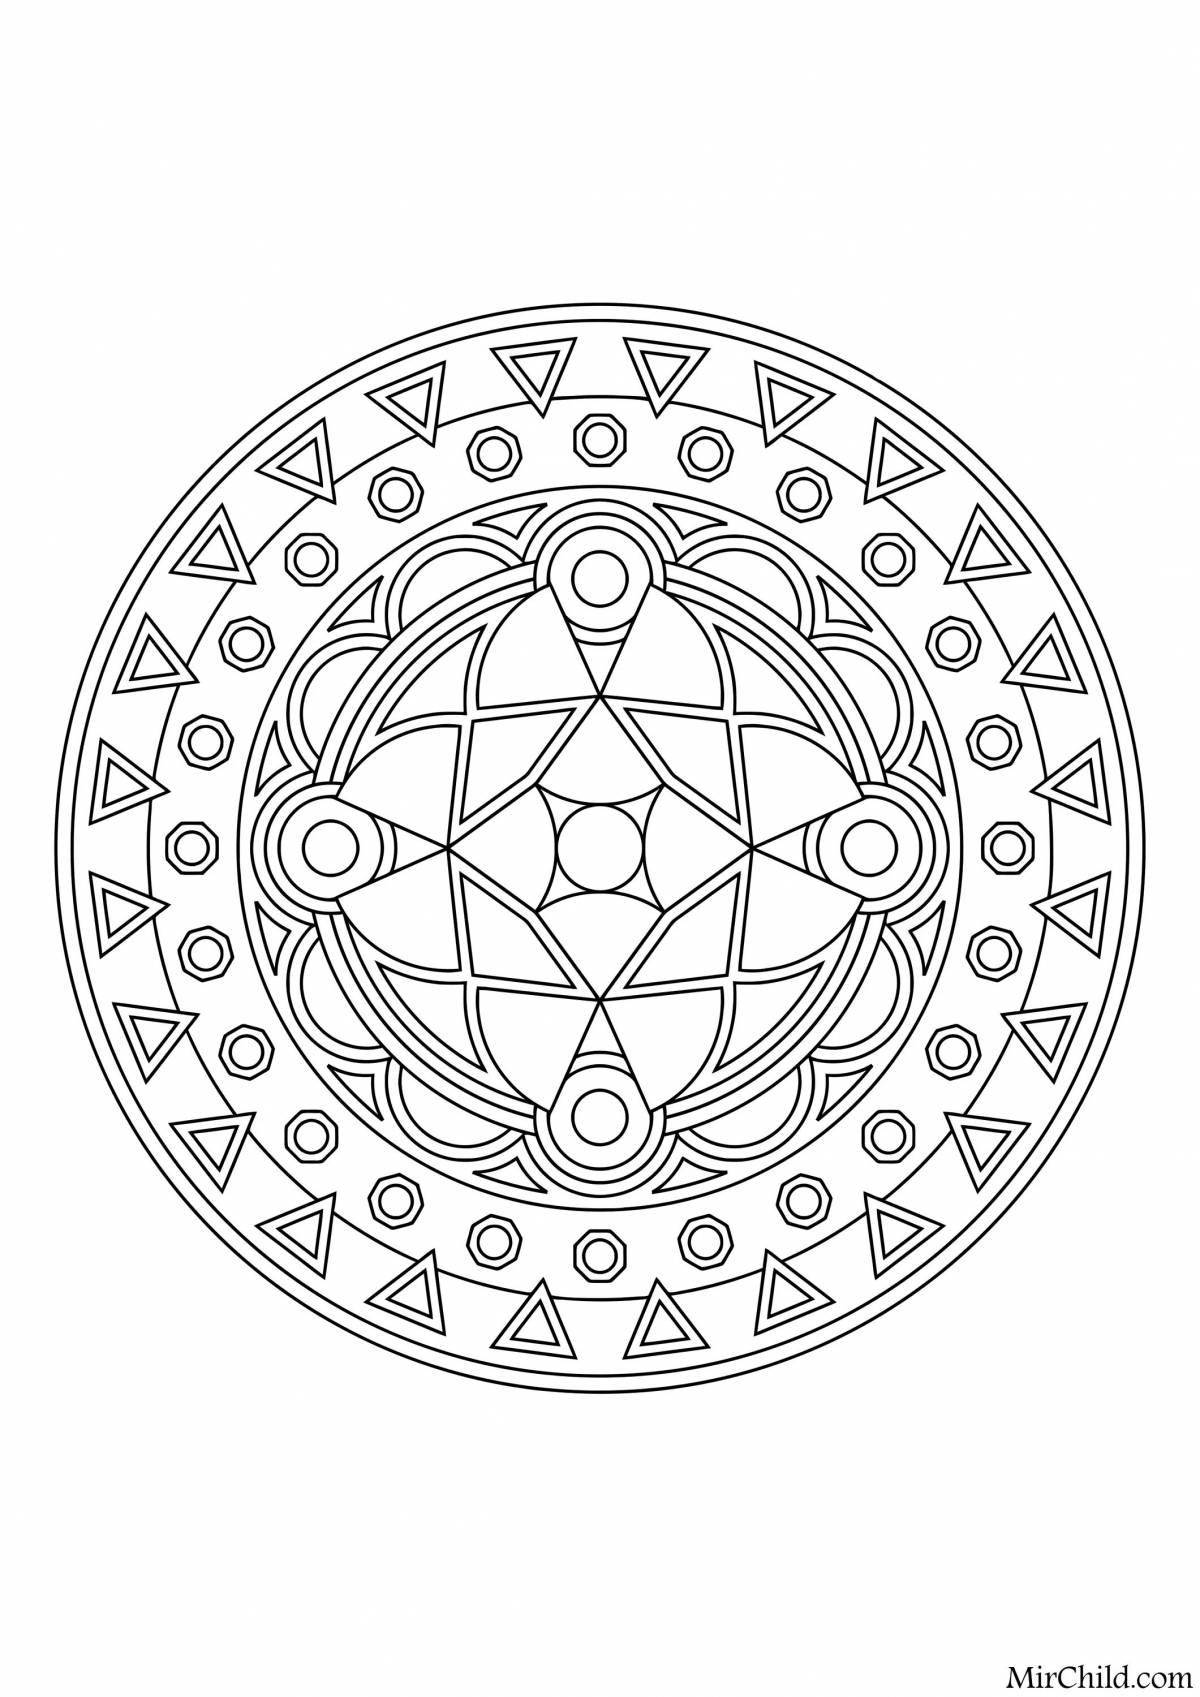 Meaning of the grand coloring page mandala